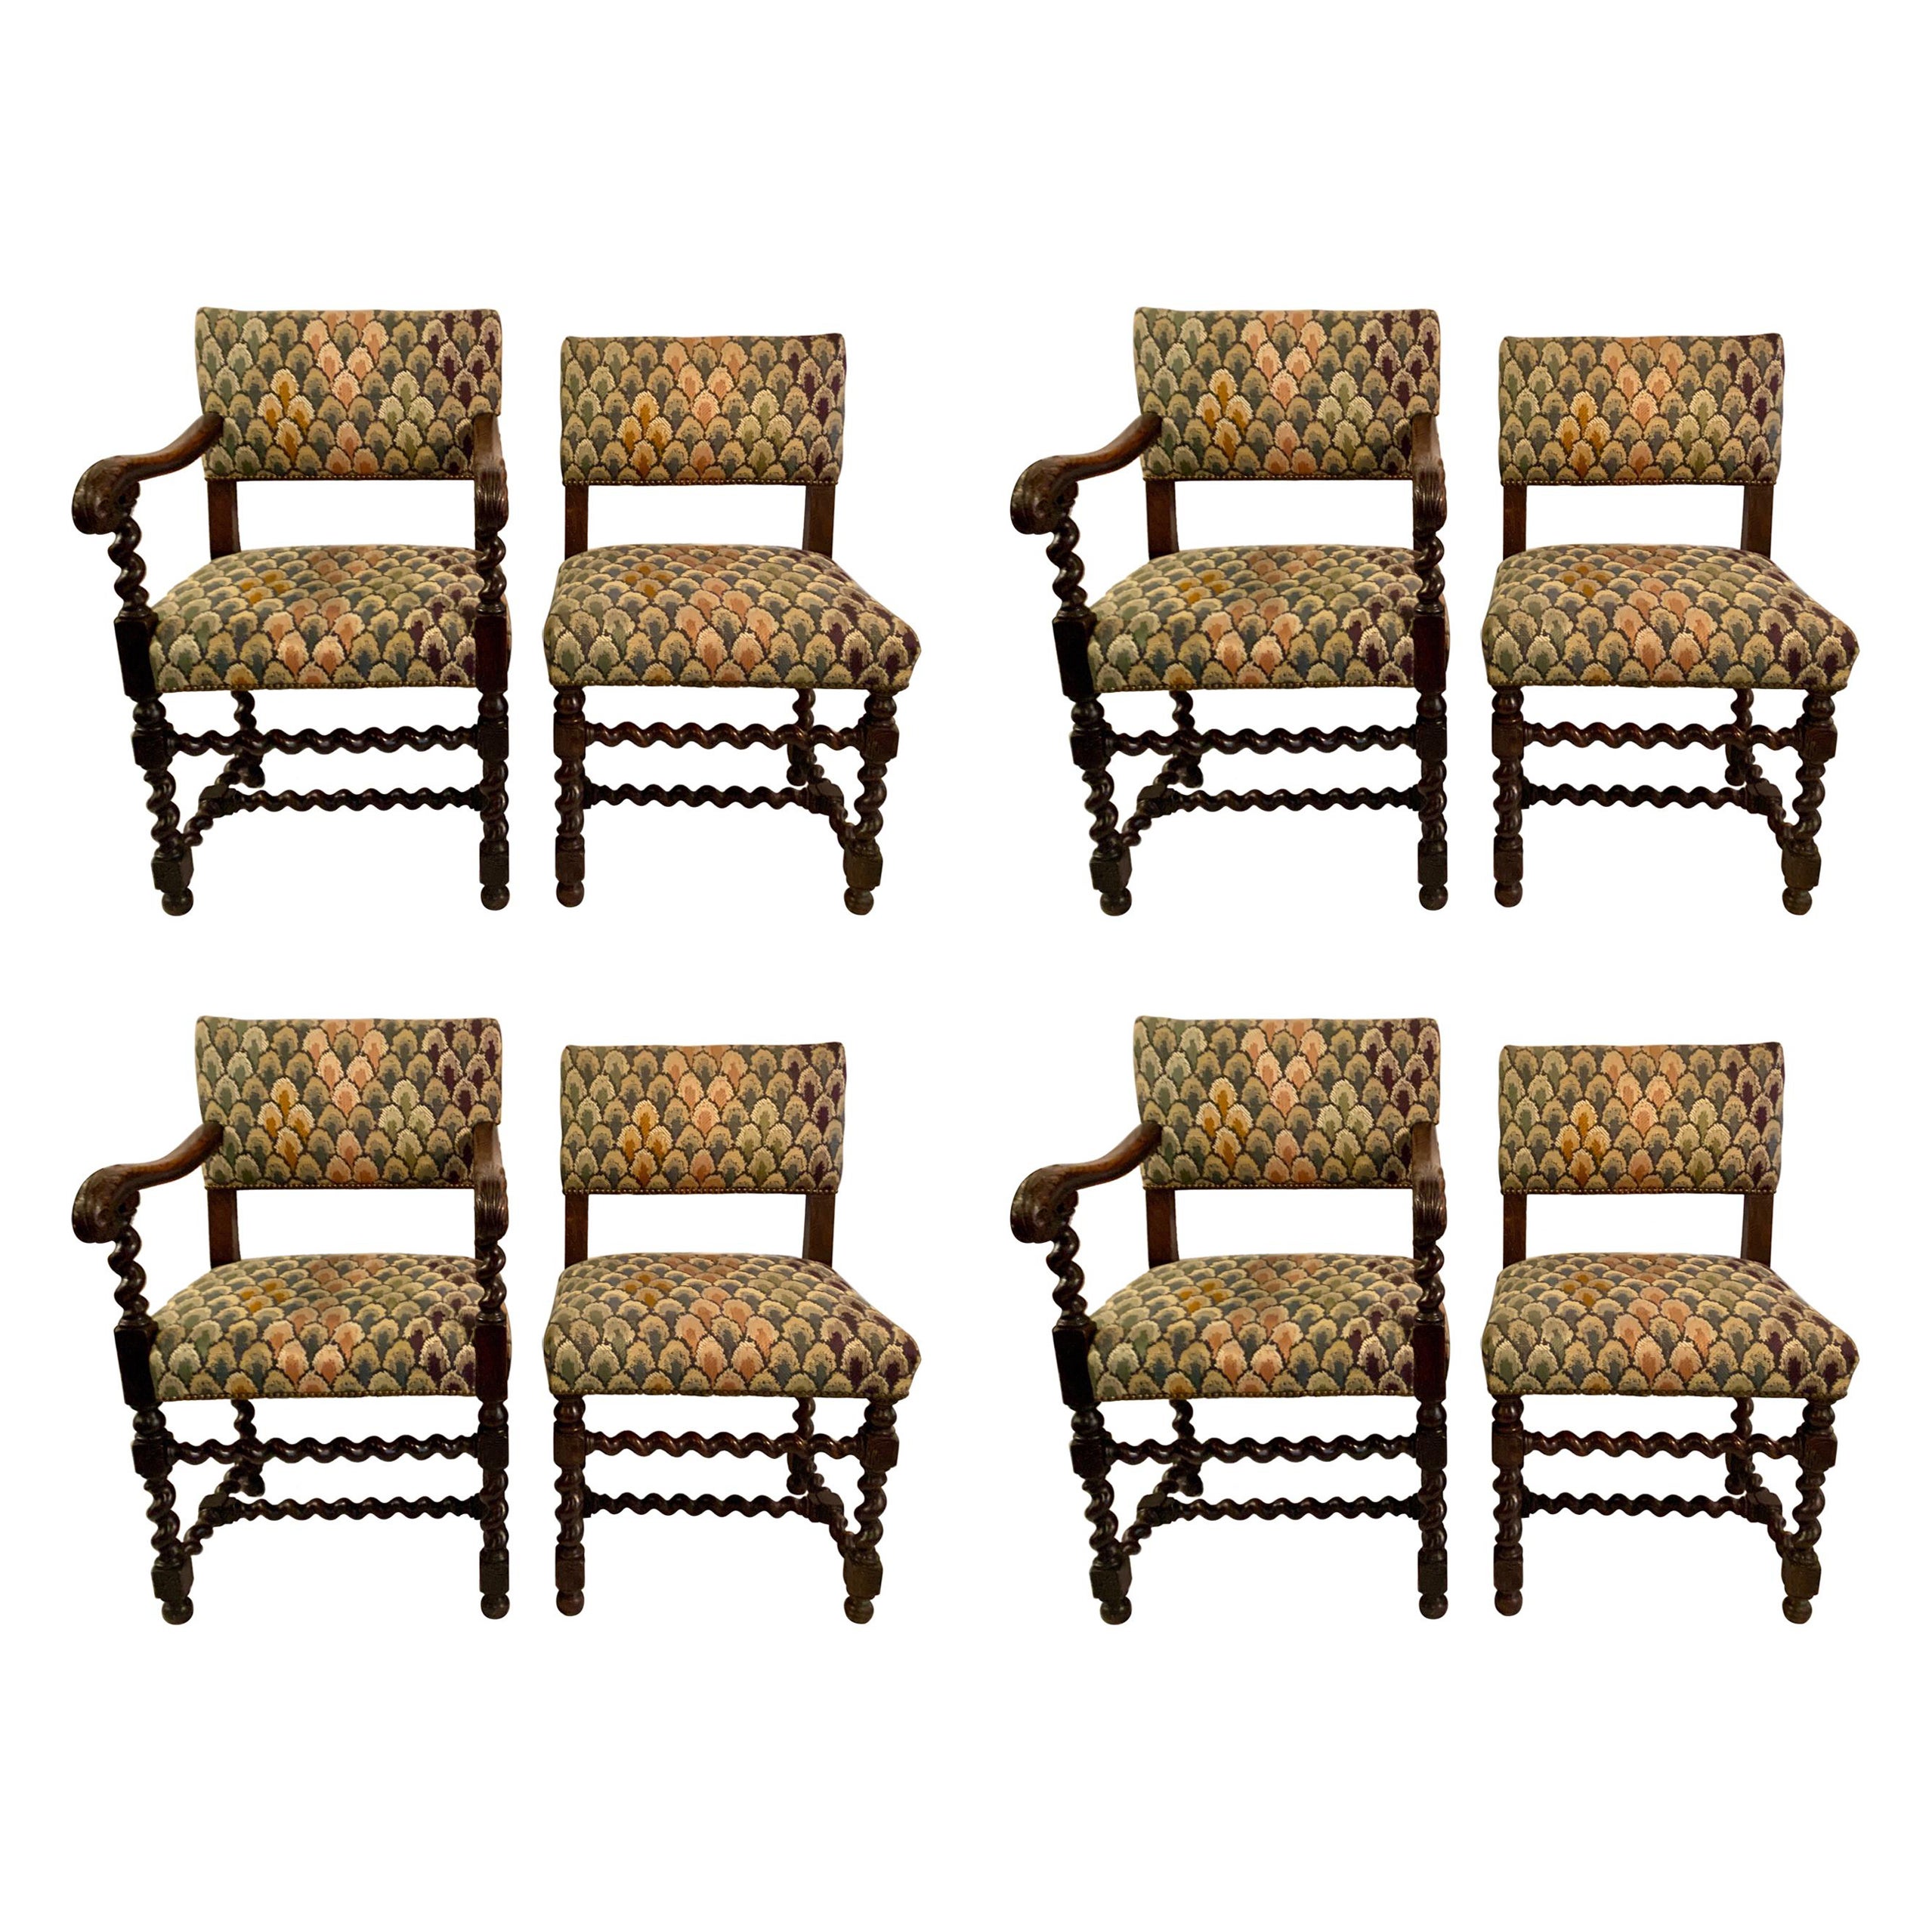 Set of 8 Antique Jacobean Carved Oak Dining Chairs, circa 1890